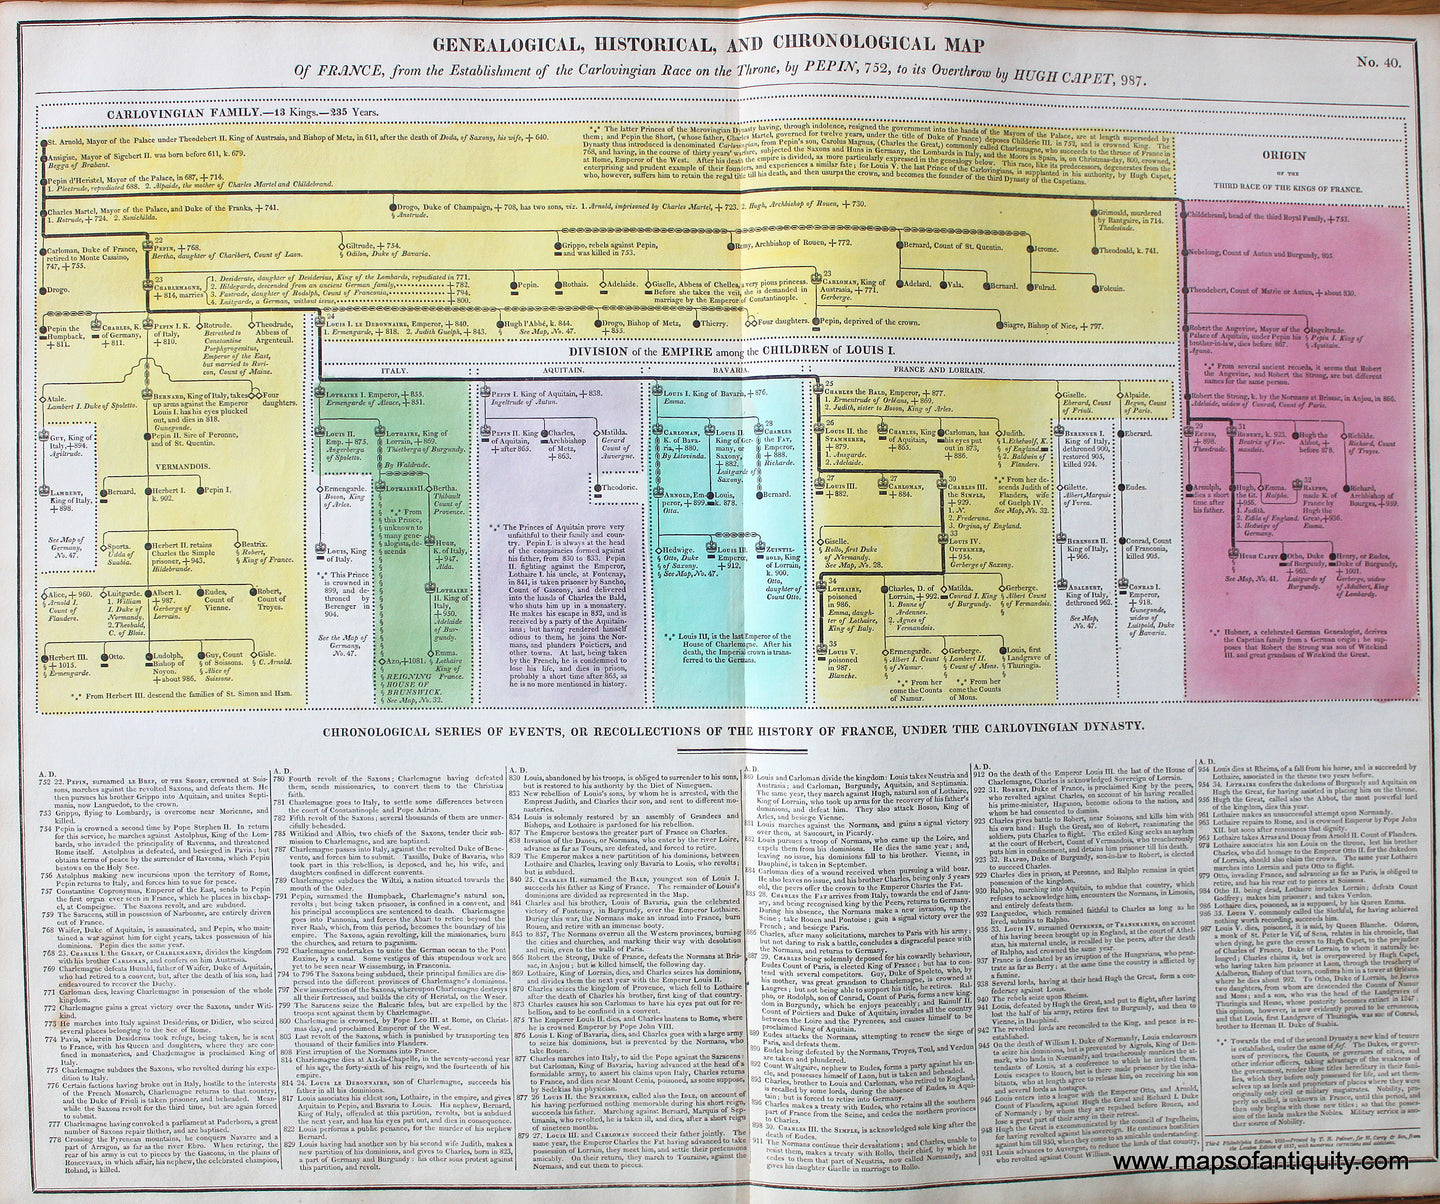 1821 - Genealogical, Historical, and Chronological Map of France, from the Establishment of the Carlovingian Race on the Throne, by Pepin, 752, to its Overthrow by Hugh Capet, 987. No. 40. - Antique Timeline Chart